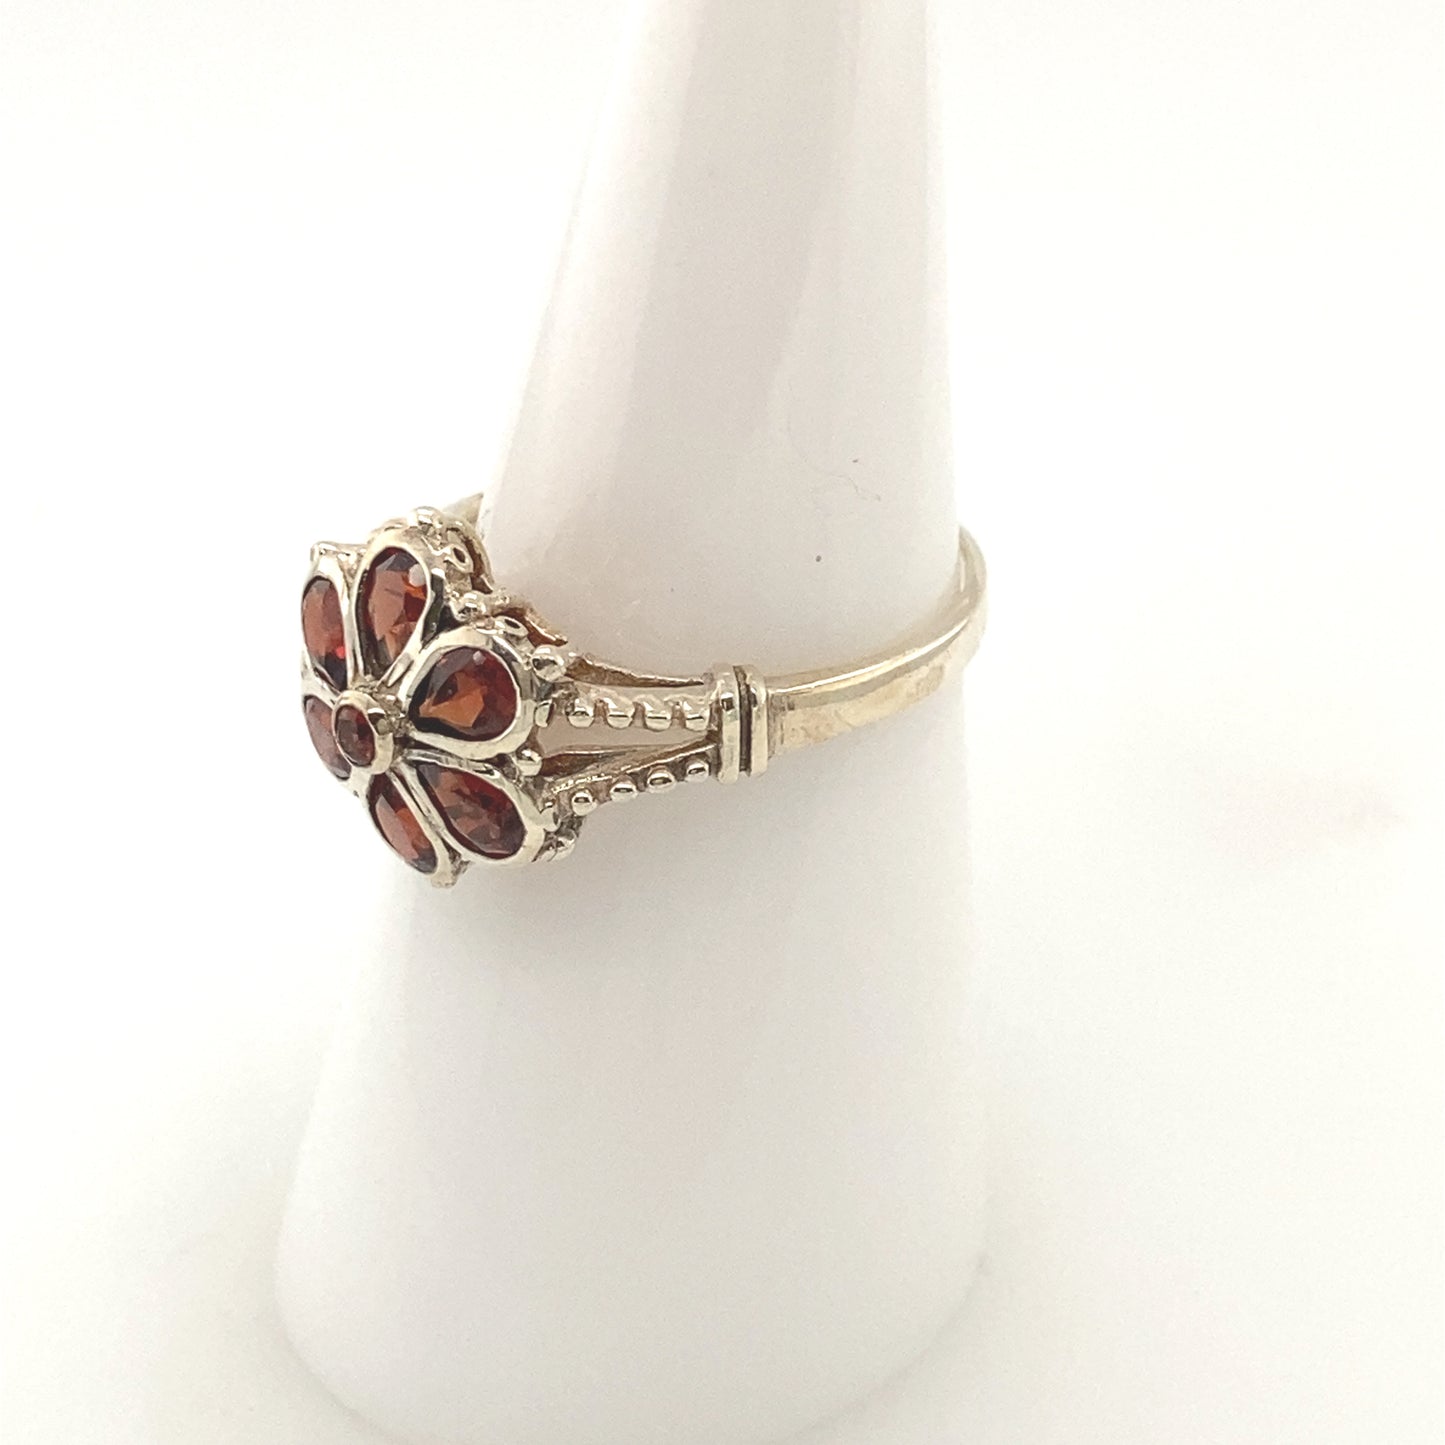 Sterling Silver 925 Rhodium plated Ring with garnet stone.